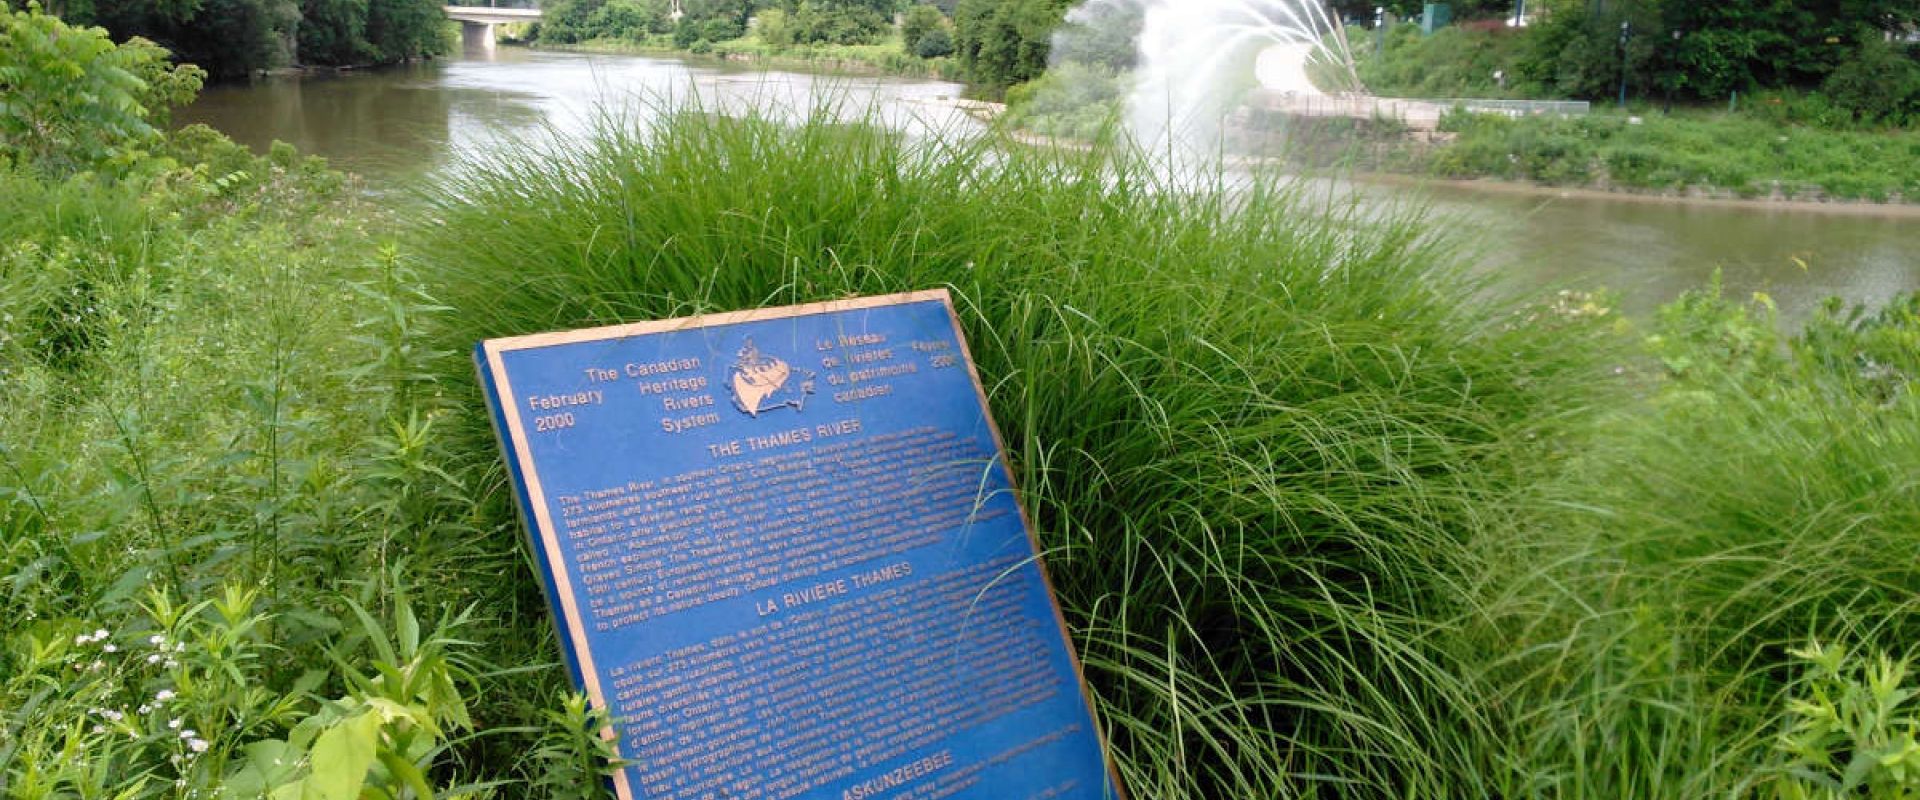 A Canadian Heritage Rivers System bronze plaque installed in a garden at the edge of the Thames River.